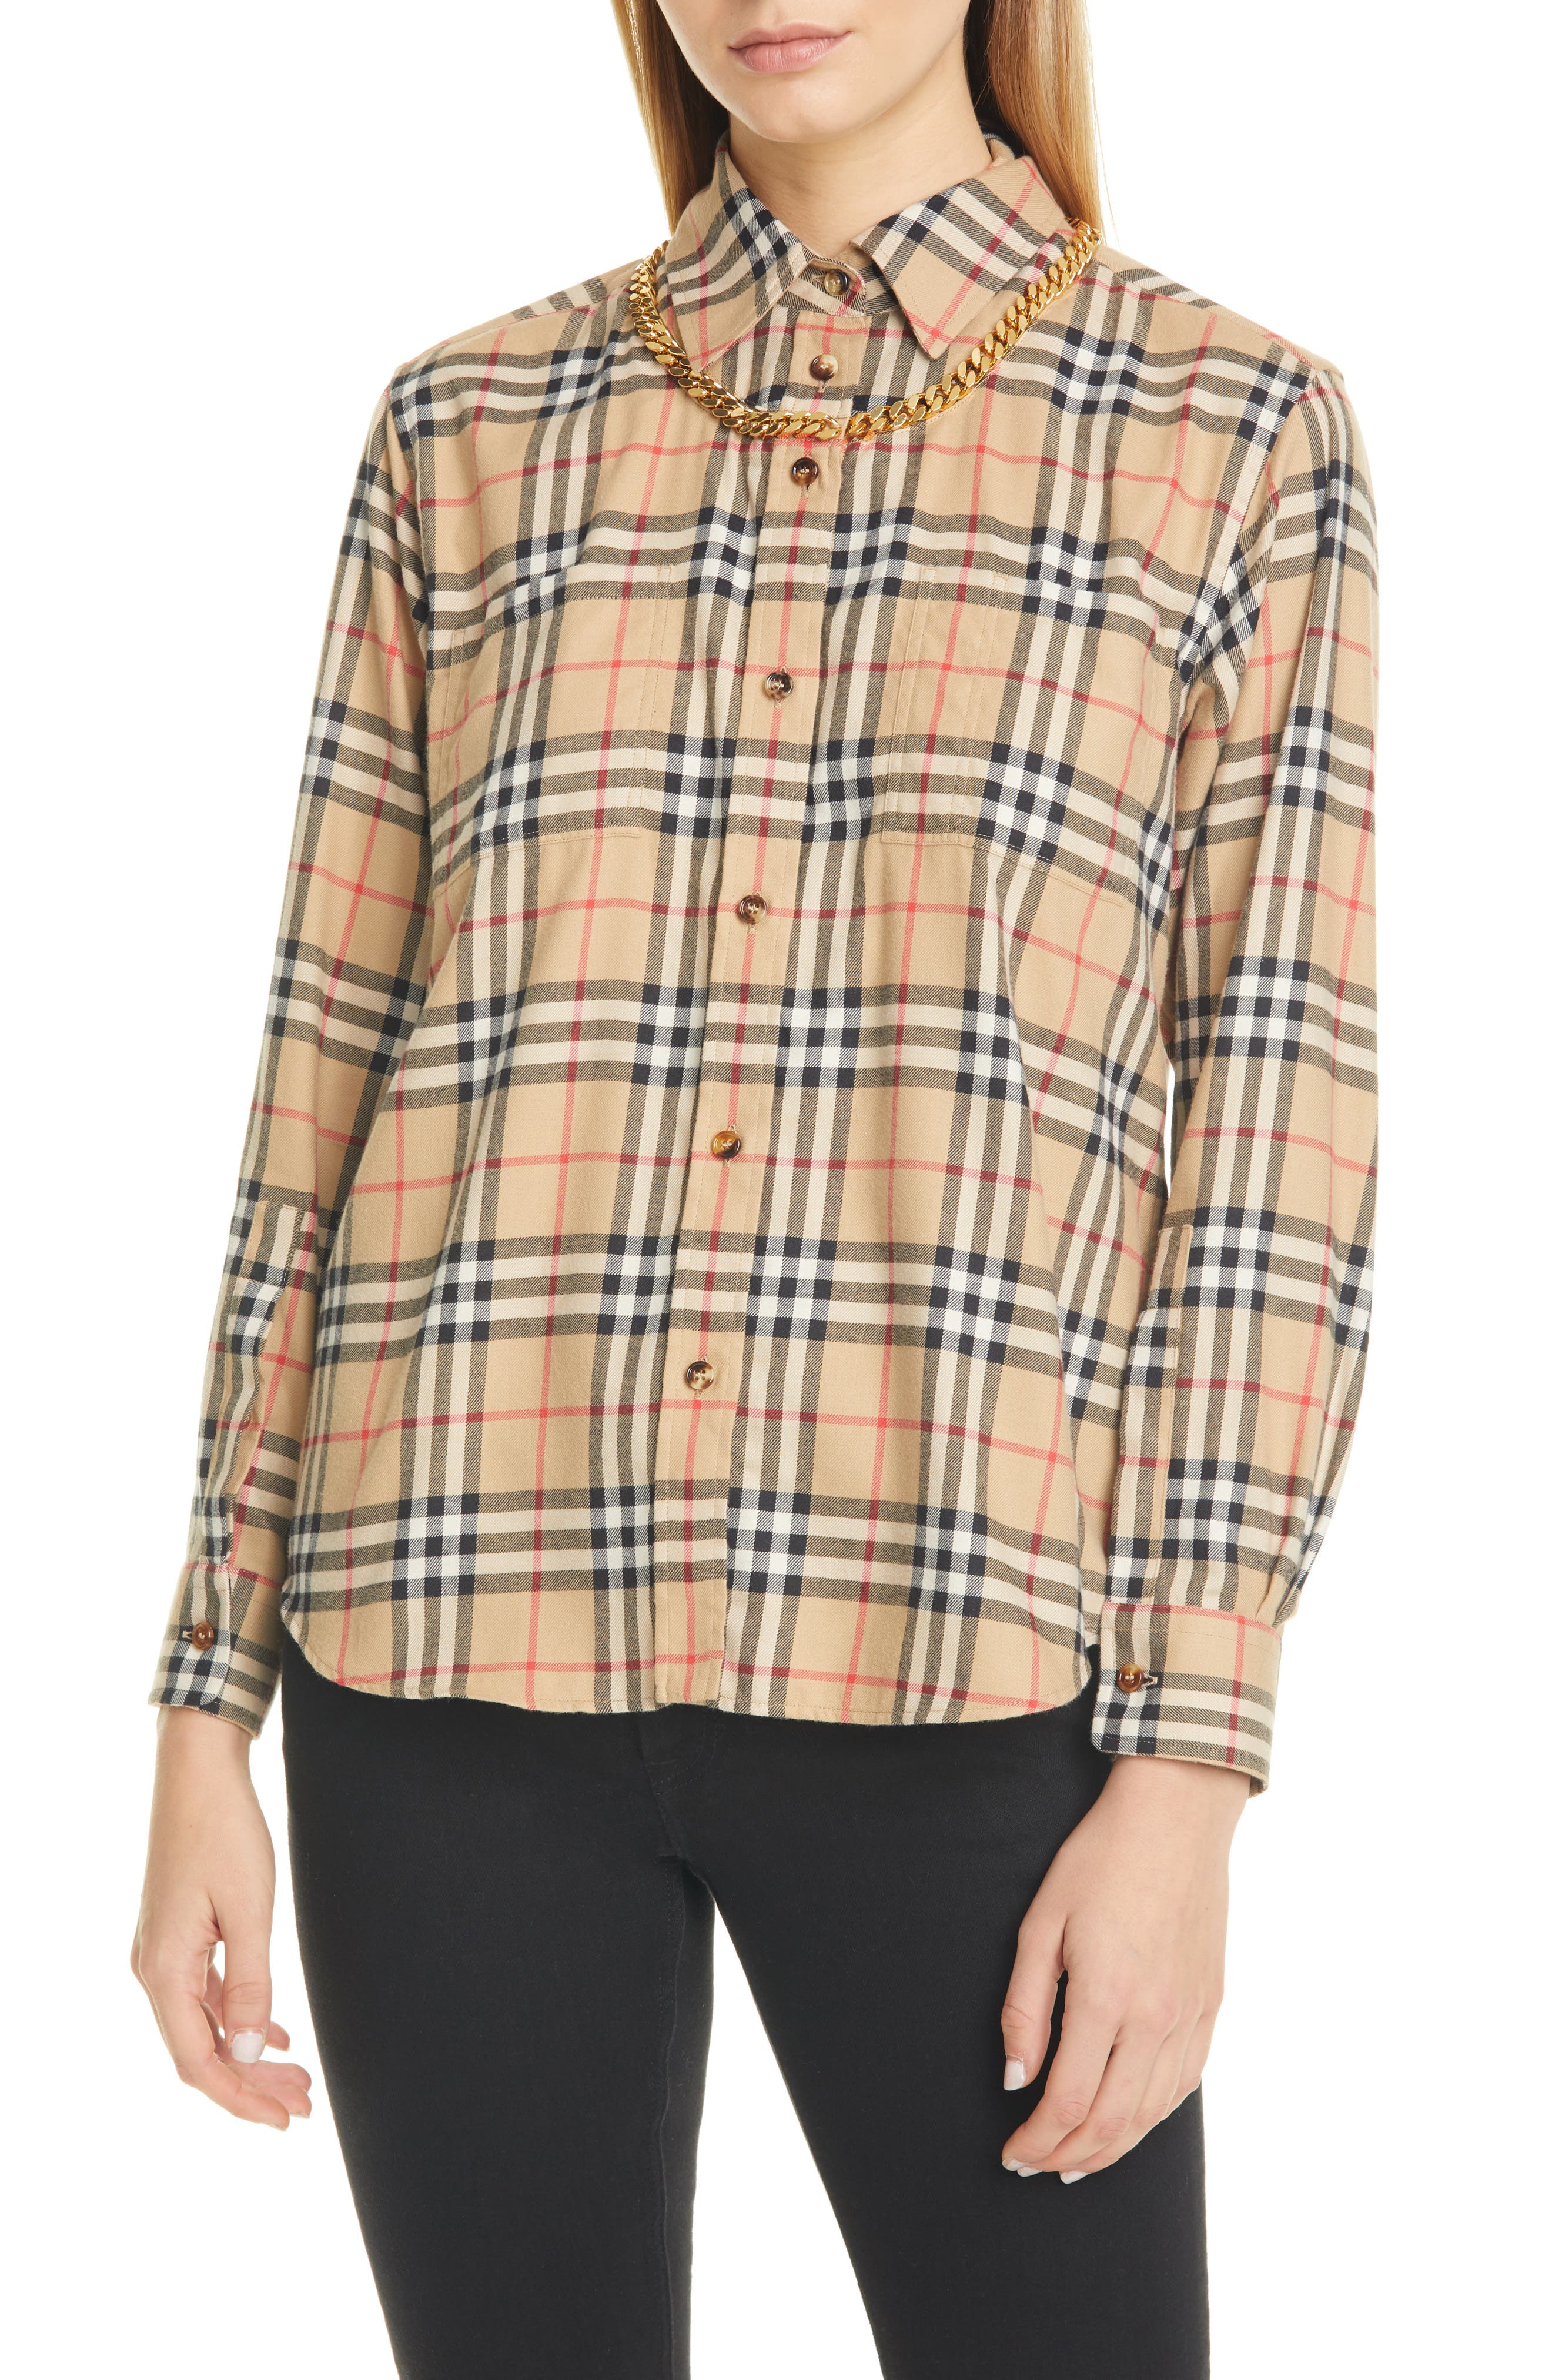 burberry style flannel